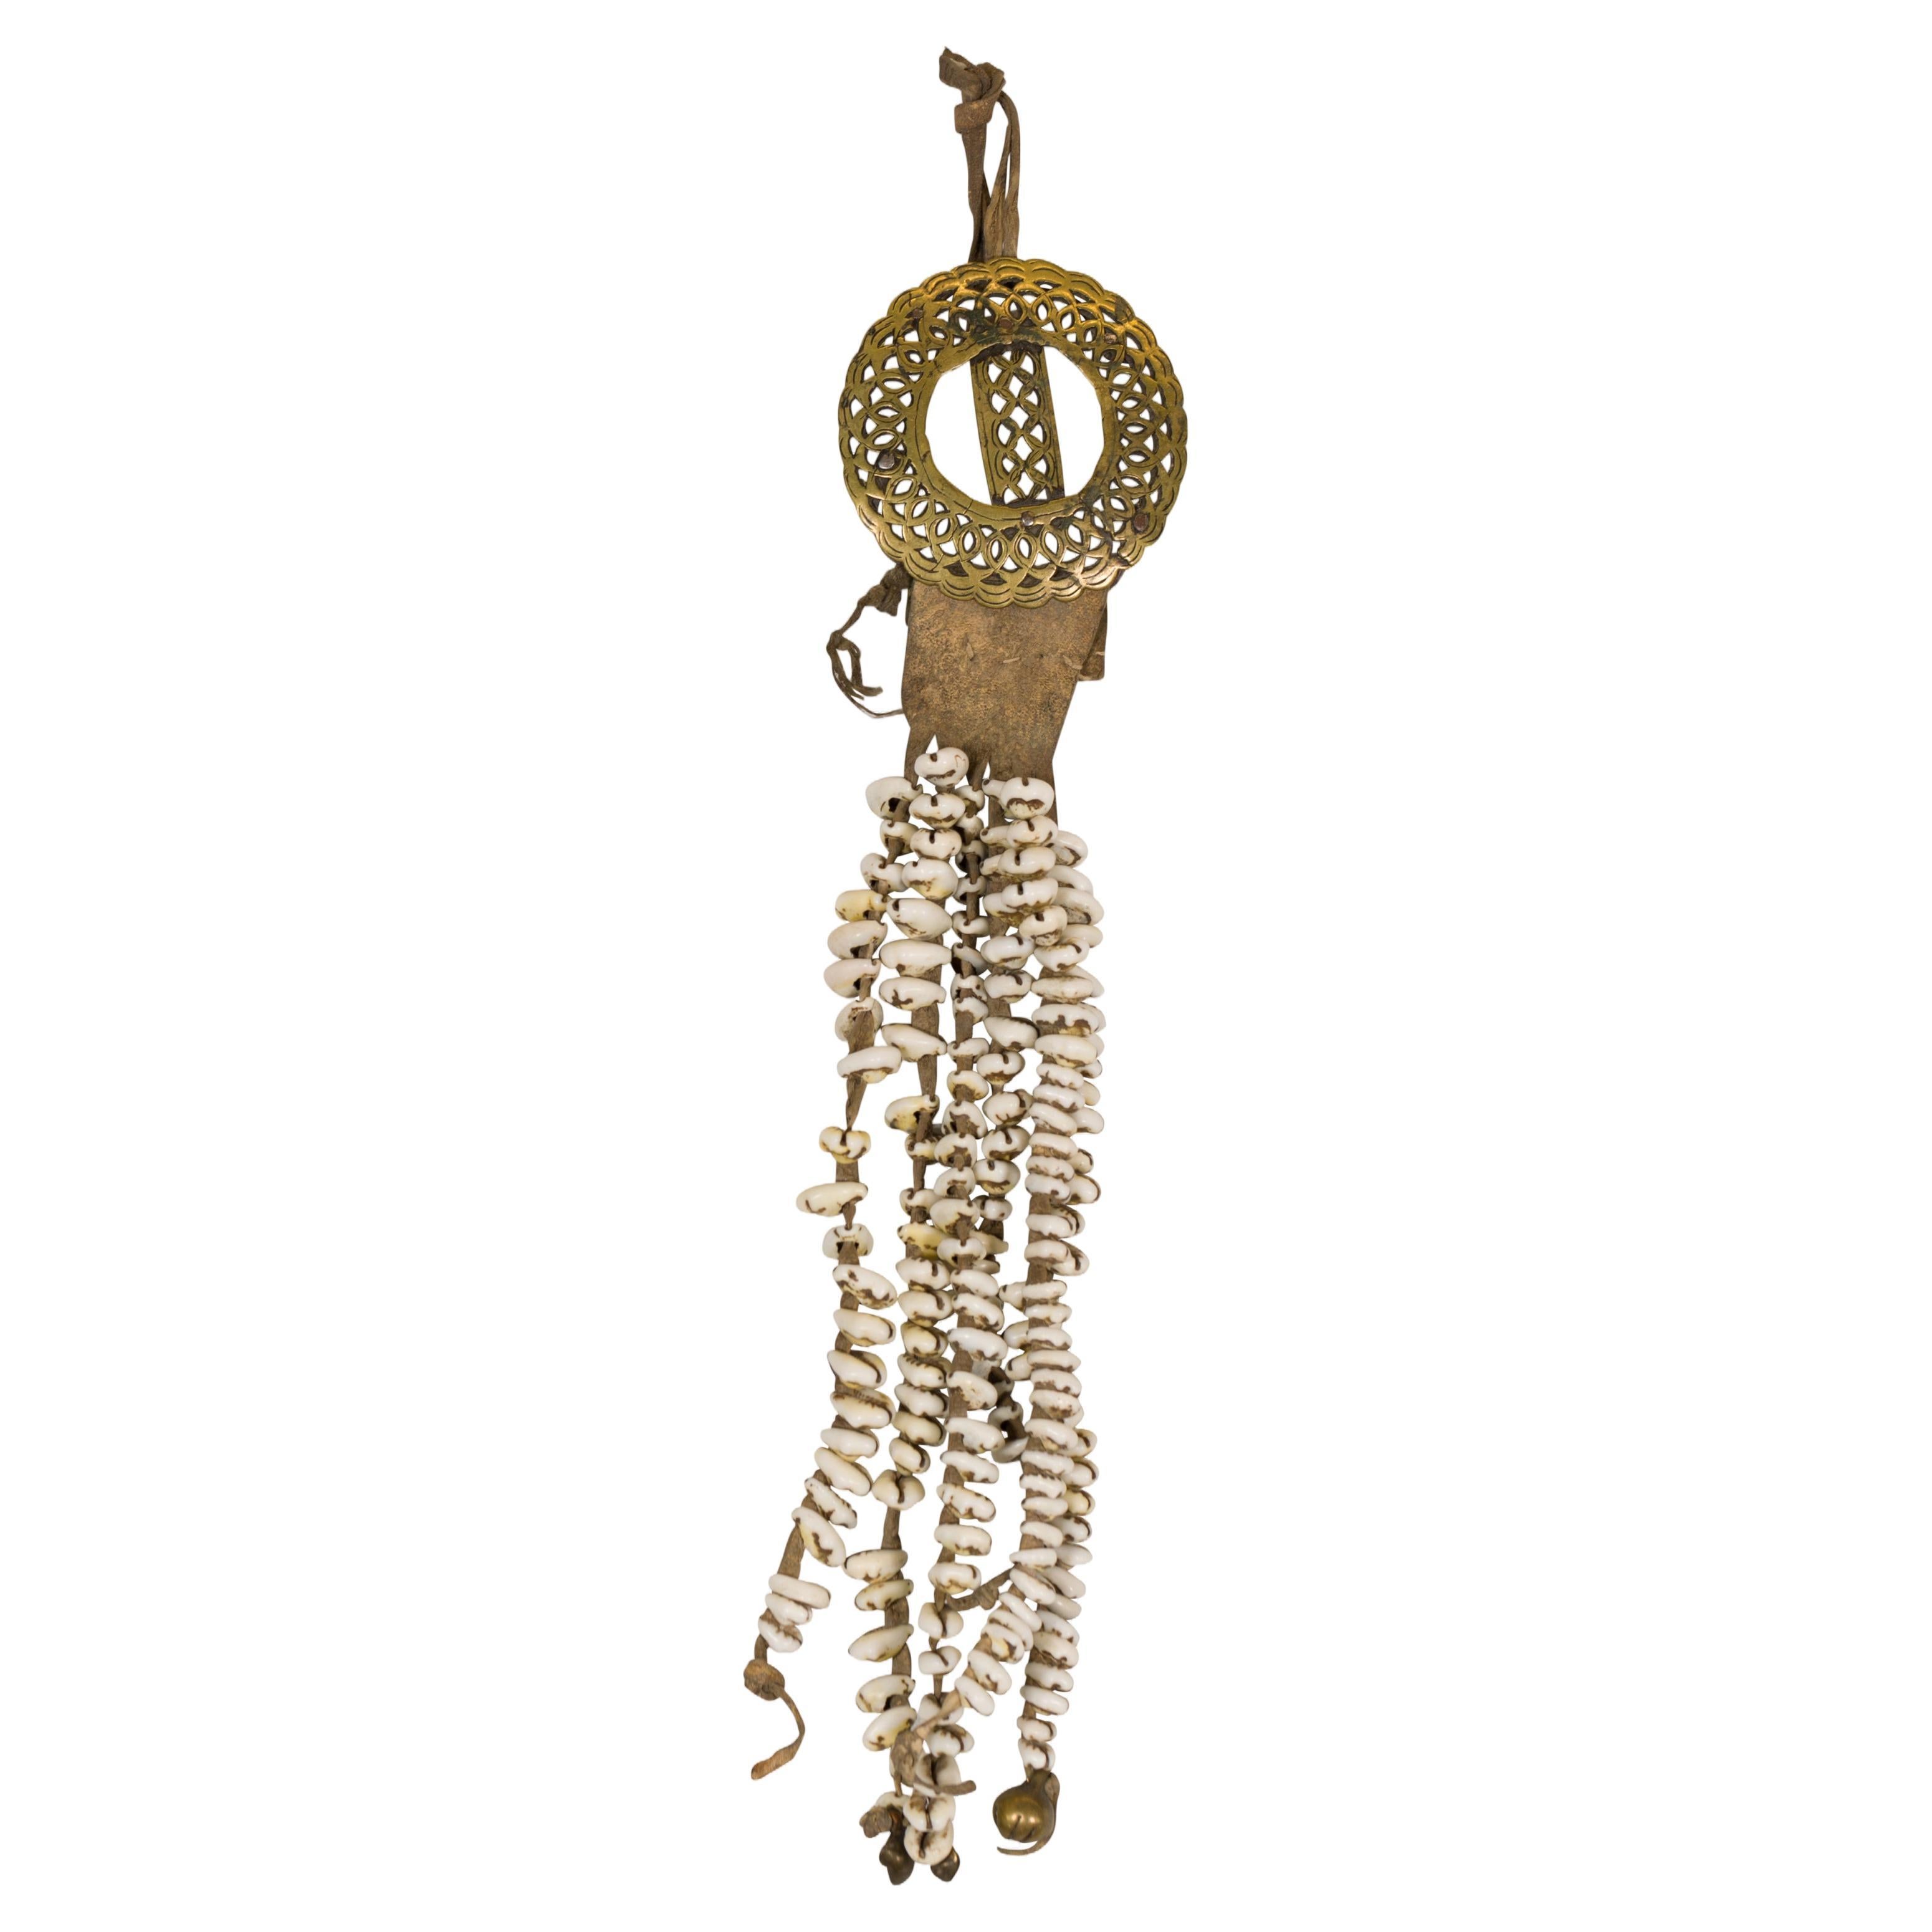 Antique Body Ornament Made of Himalayan Shells Secured to a Brass Buckle For Sale